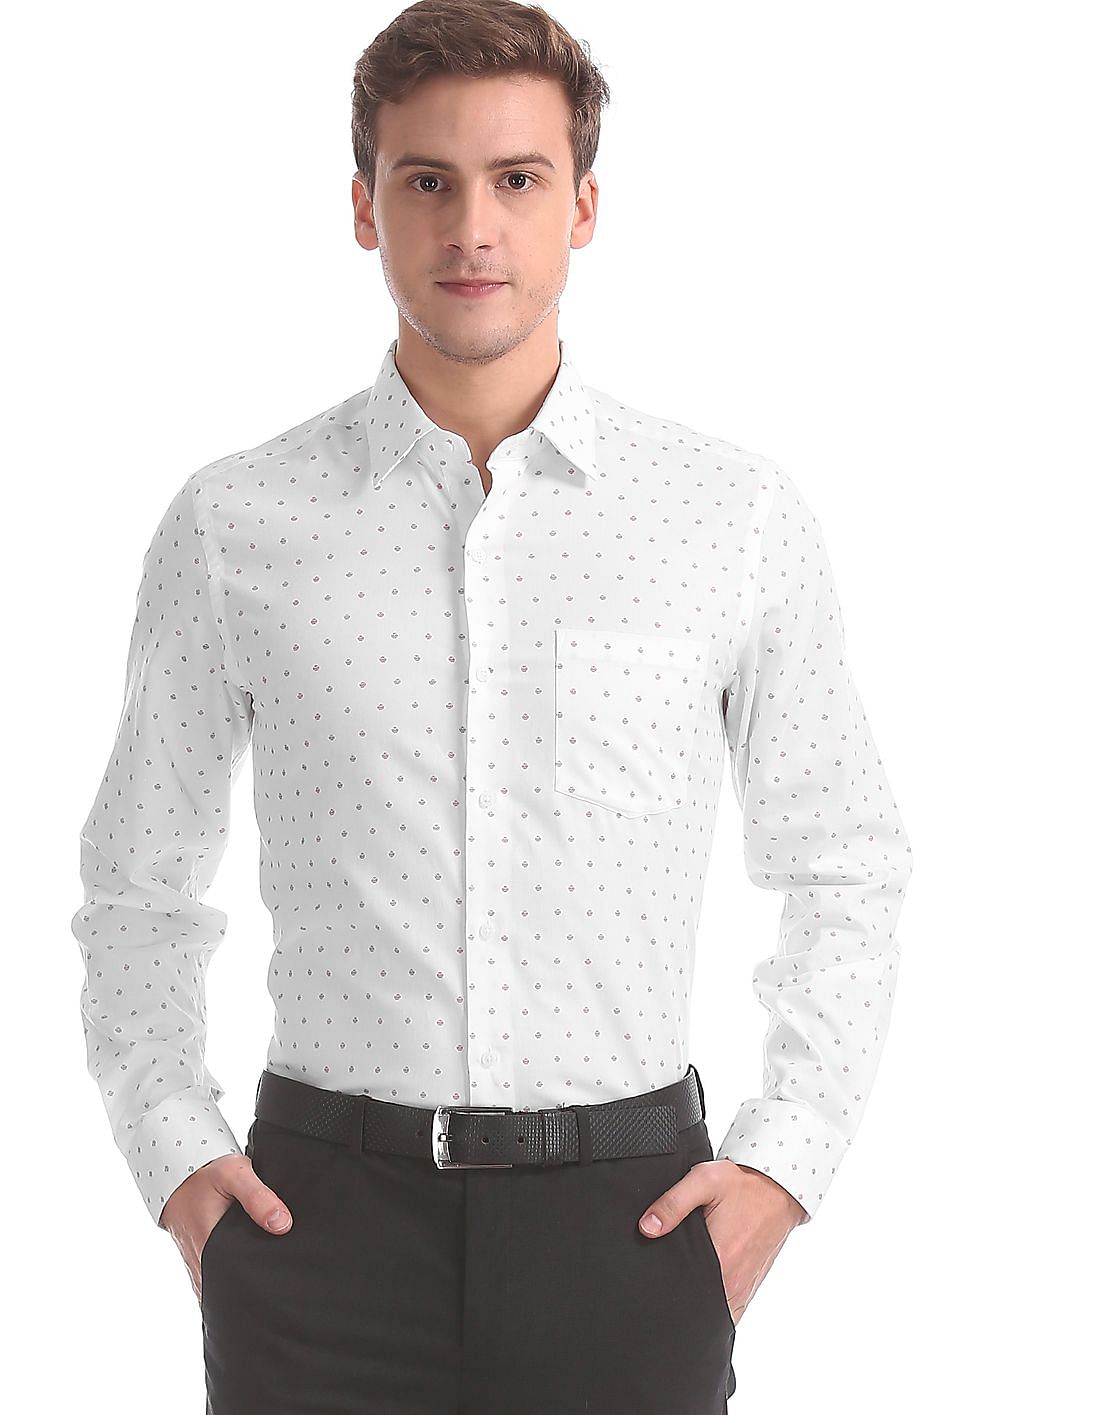 Buy Men White French Placket Allover Print Shirt online at NNNOW.com